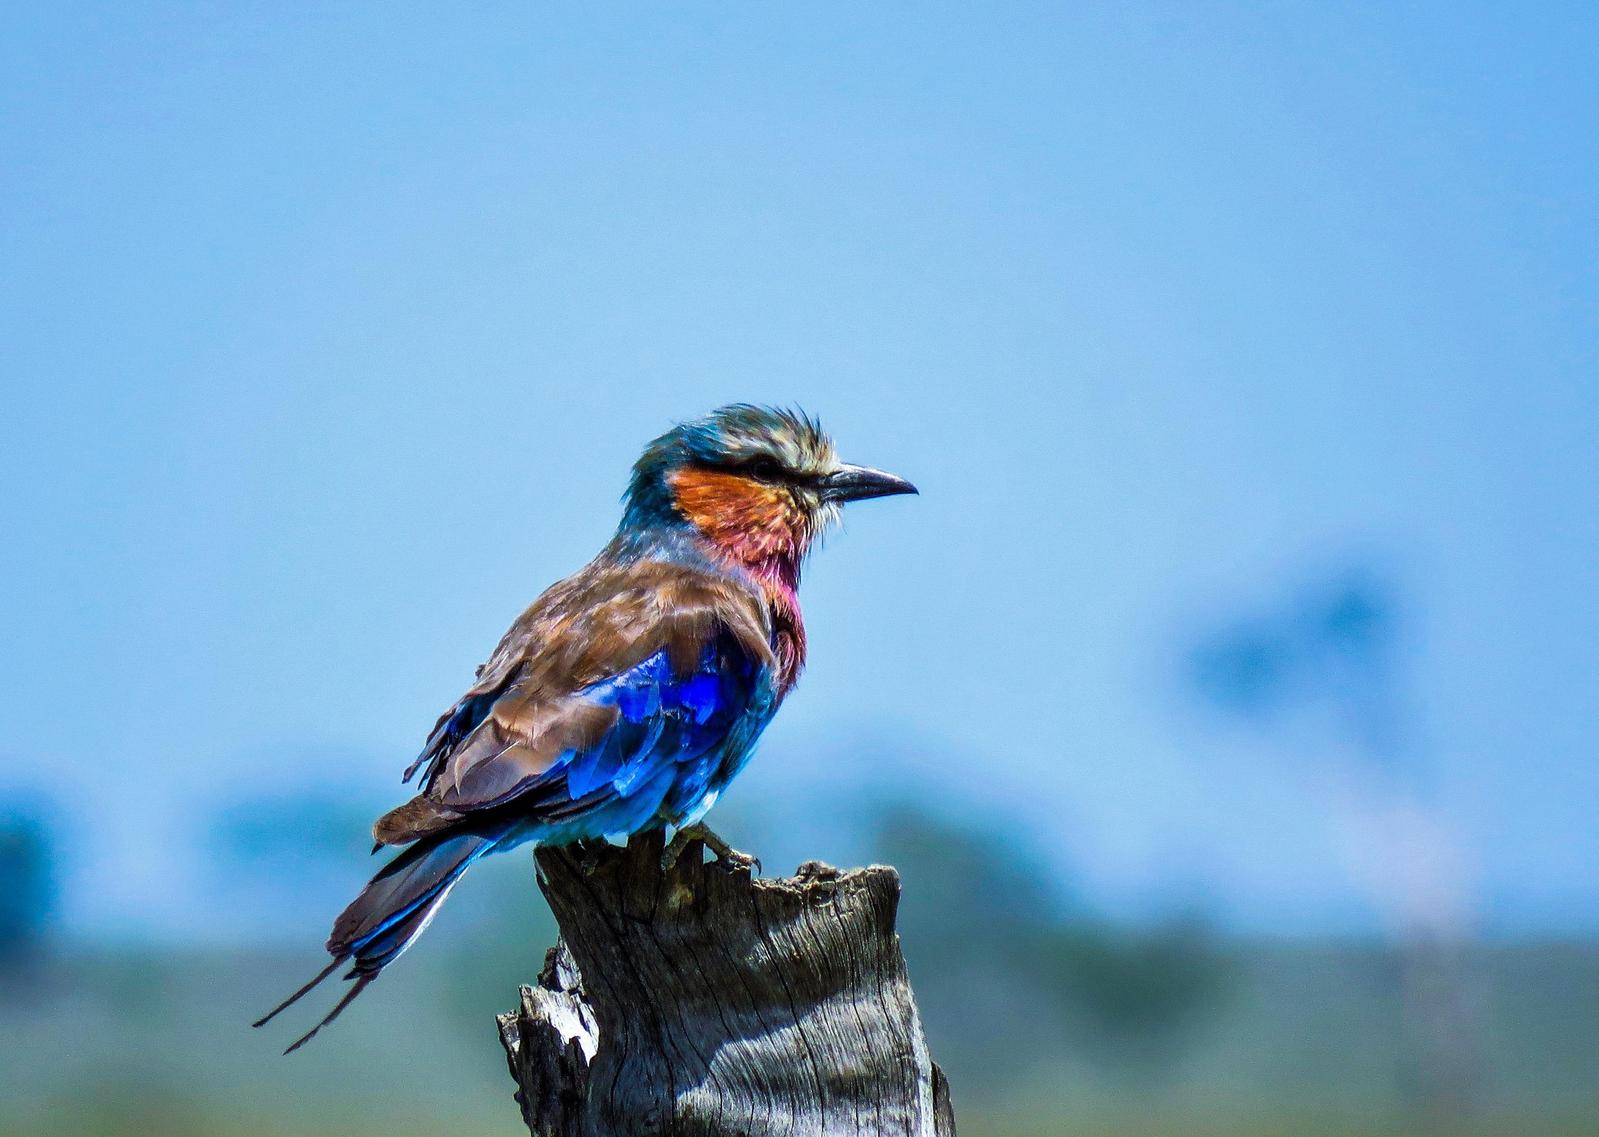 Lilac-breasted Roller Photo by Thomas Girman